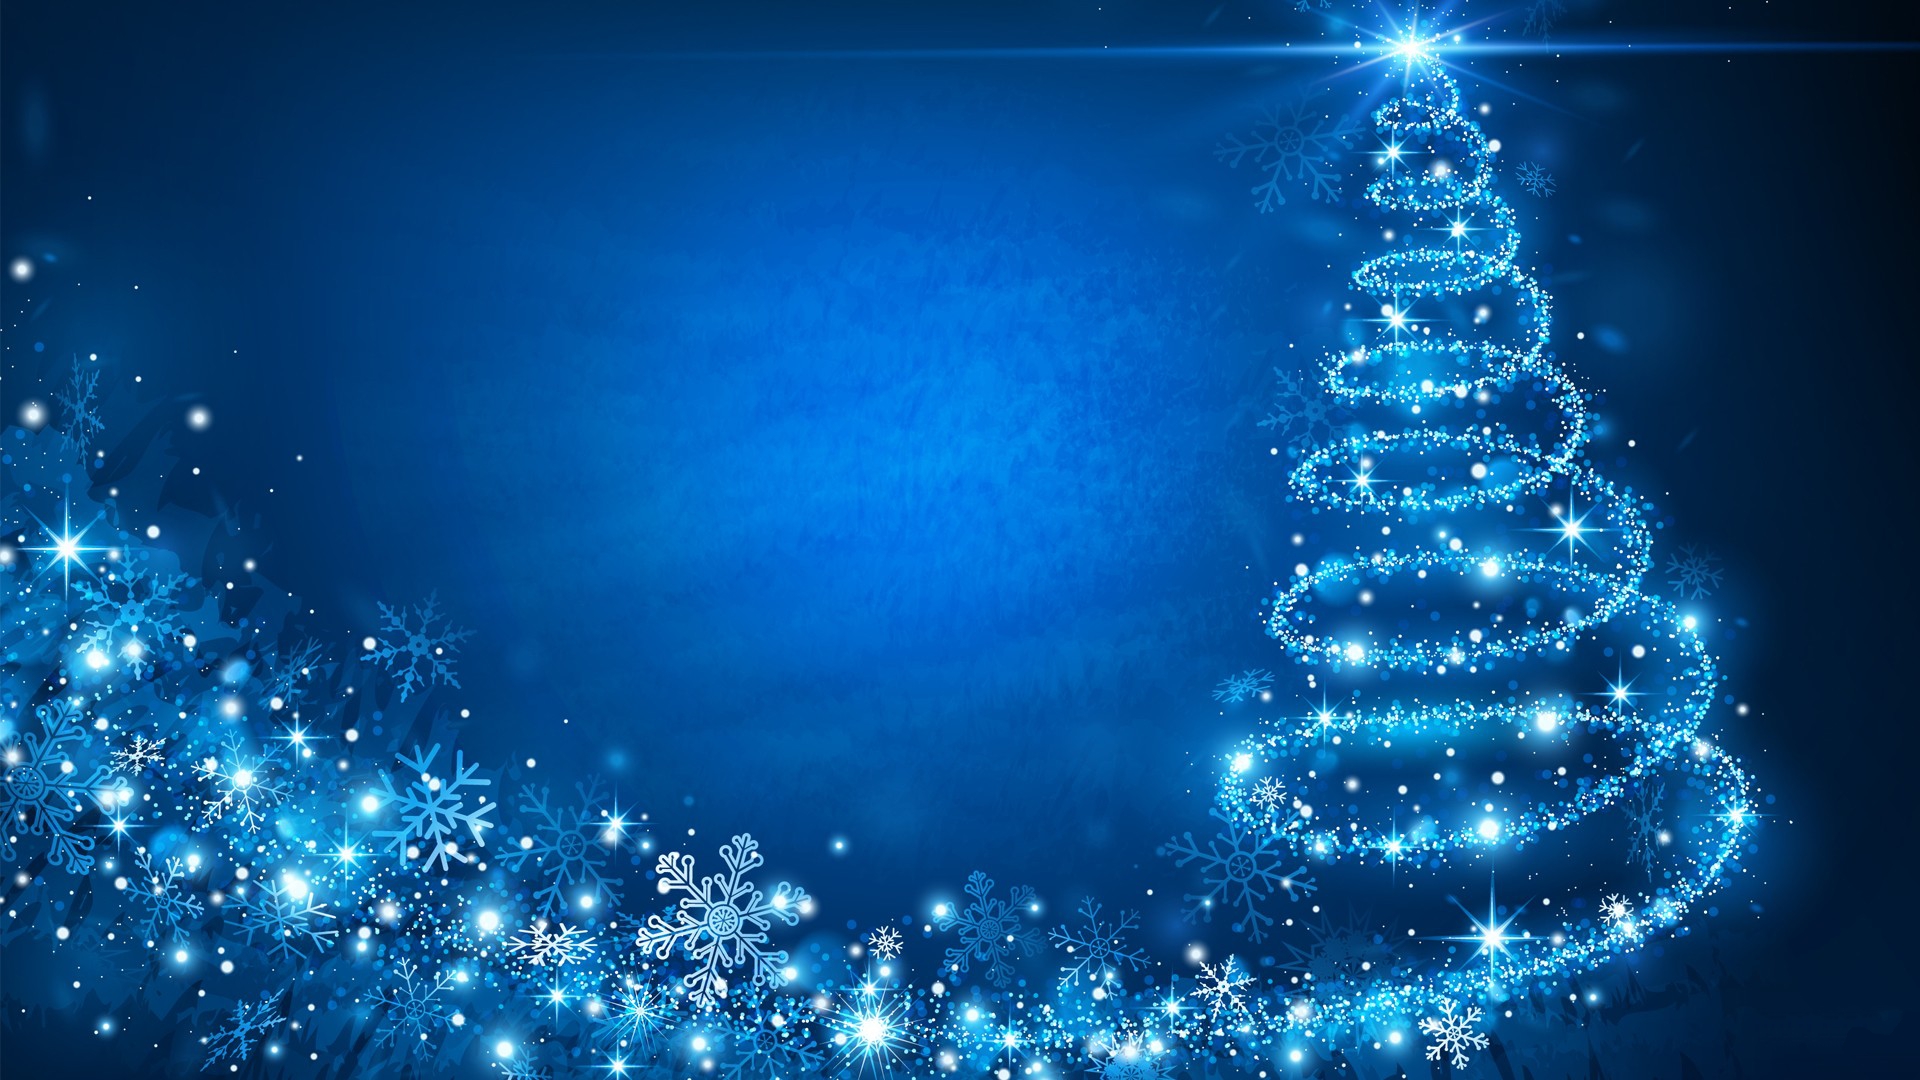 29] Christmas Backgrounds Wallpaper on